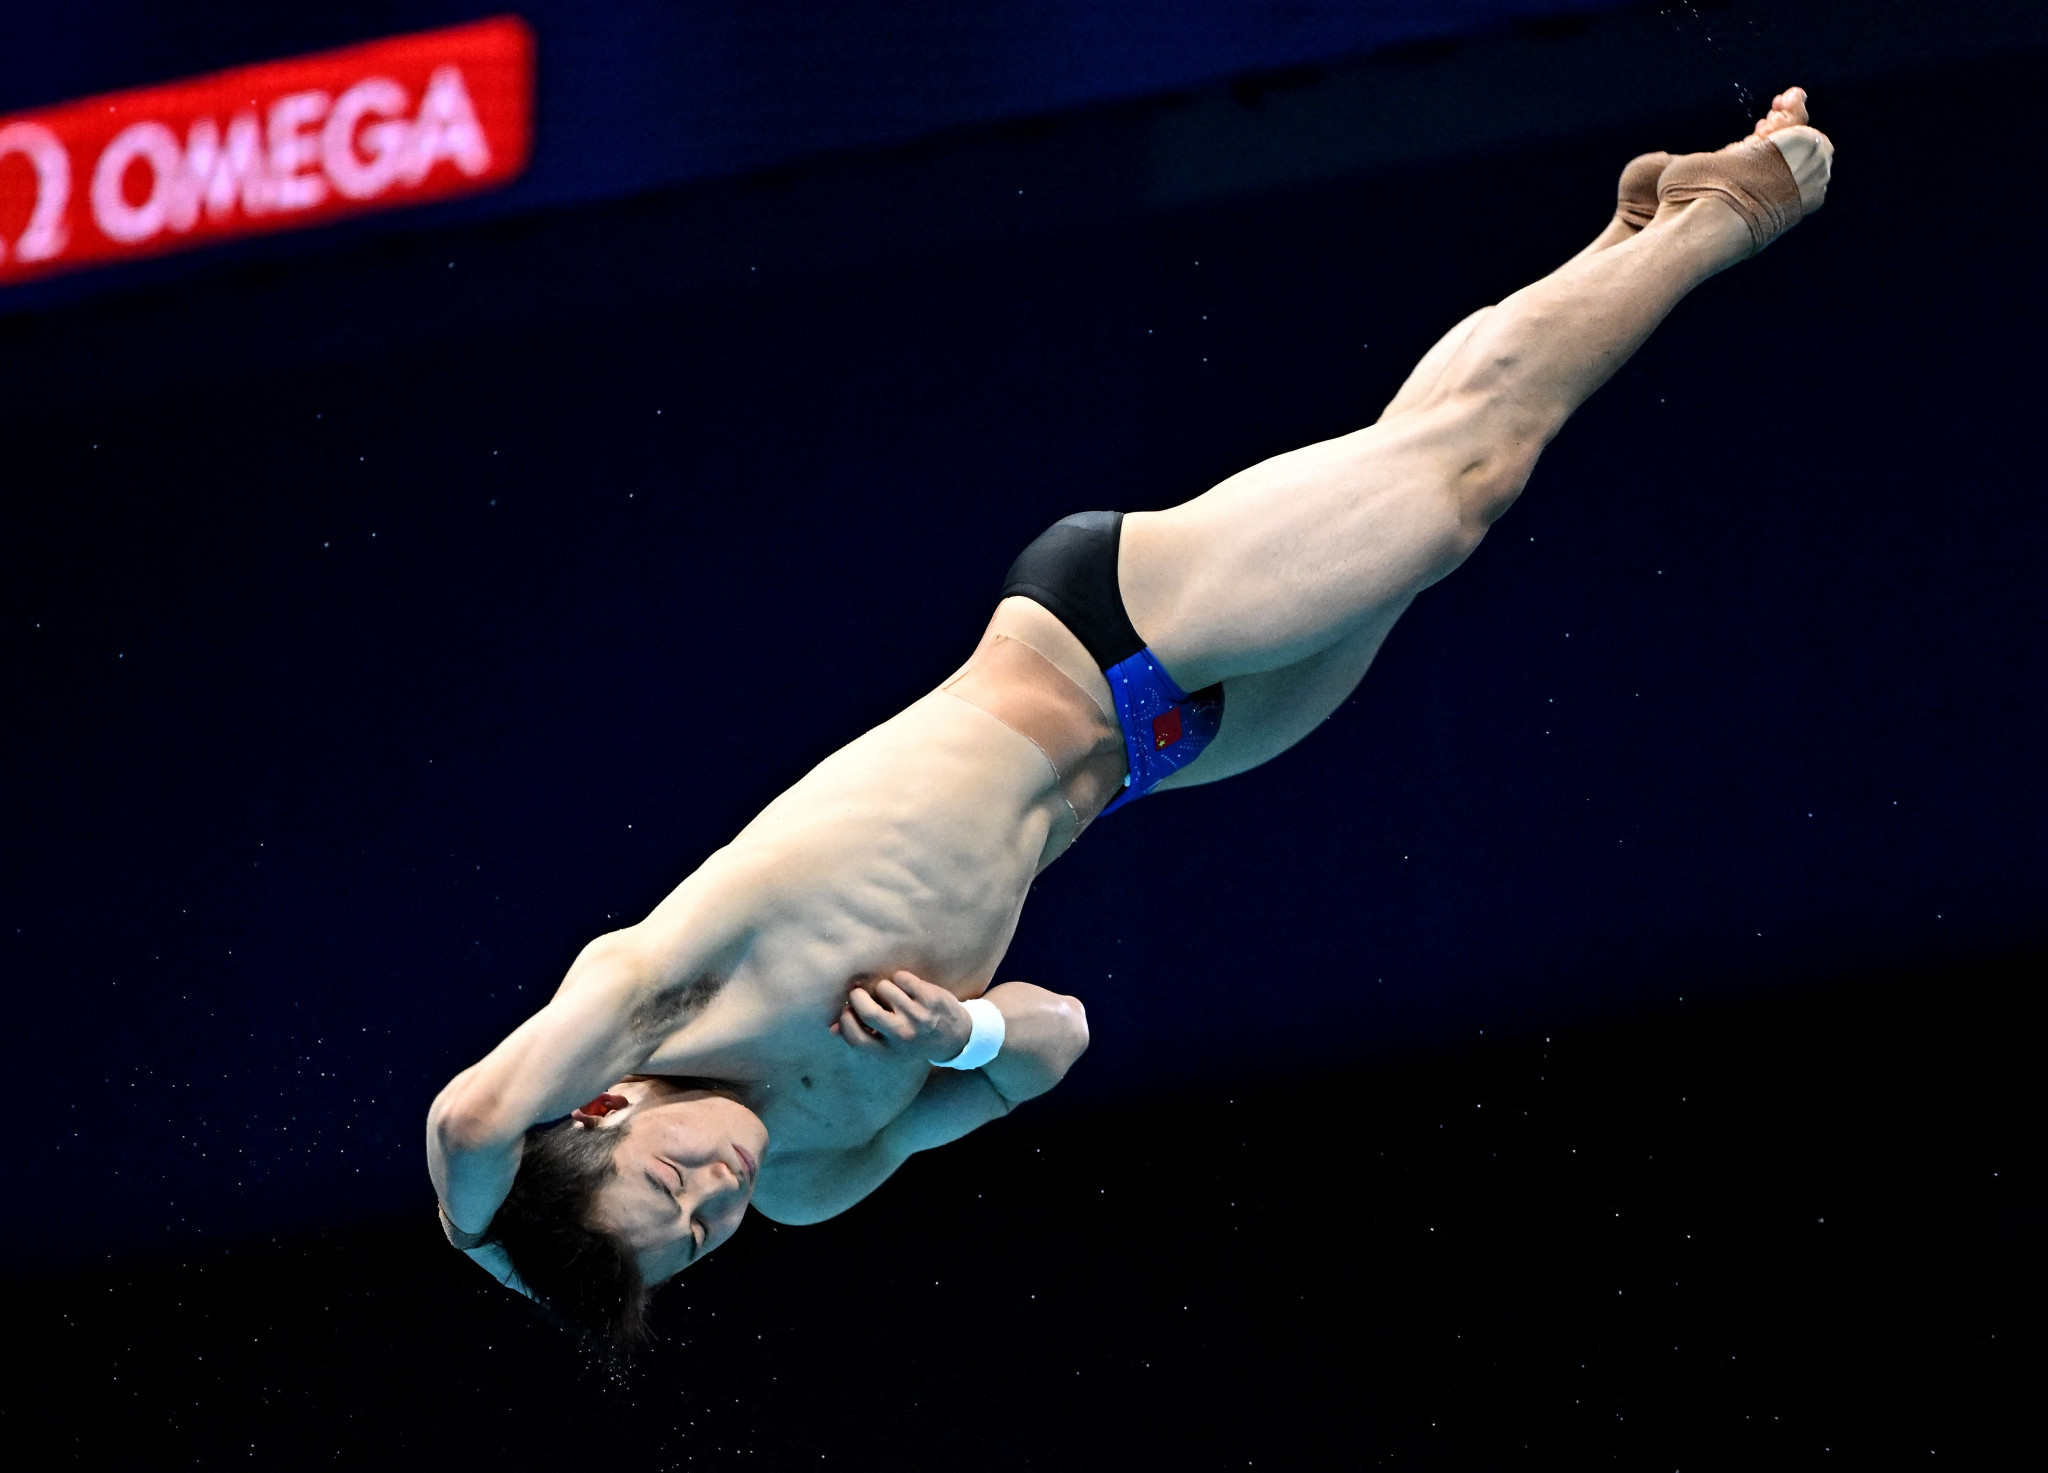 China's Zongyuan Wang led the scoring in the men's 3m springboard preliminary round and semi-final ©Getty Images